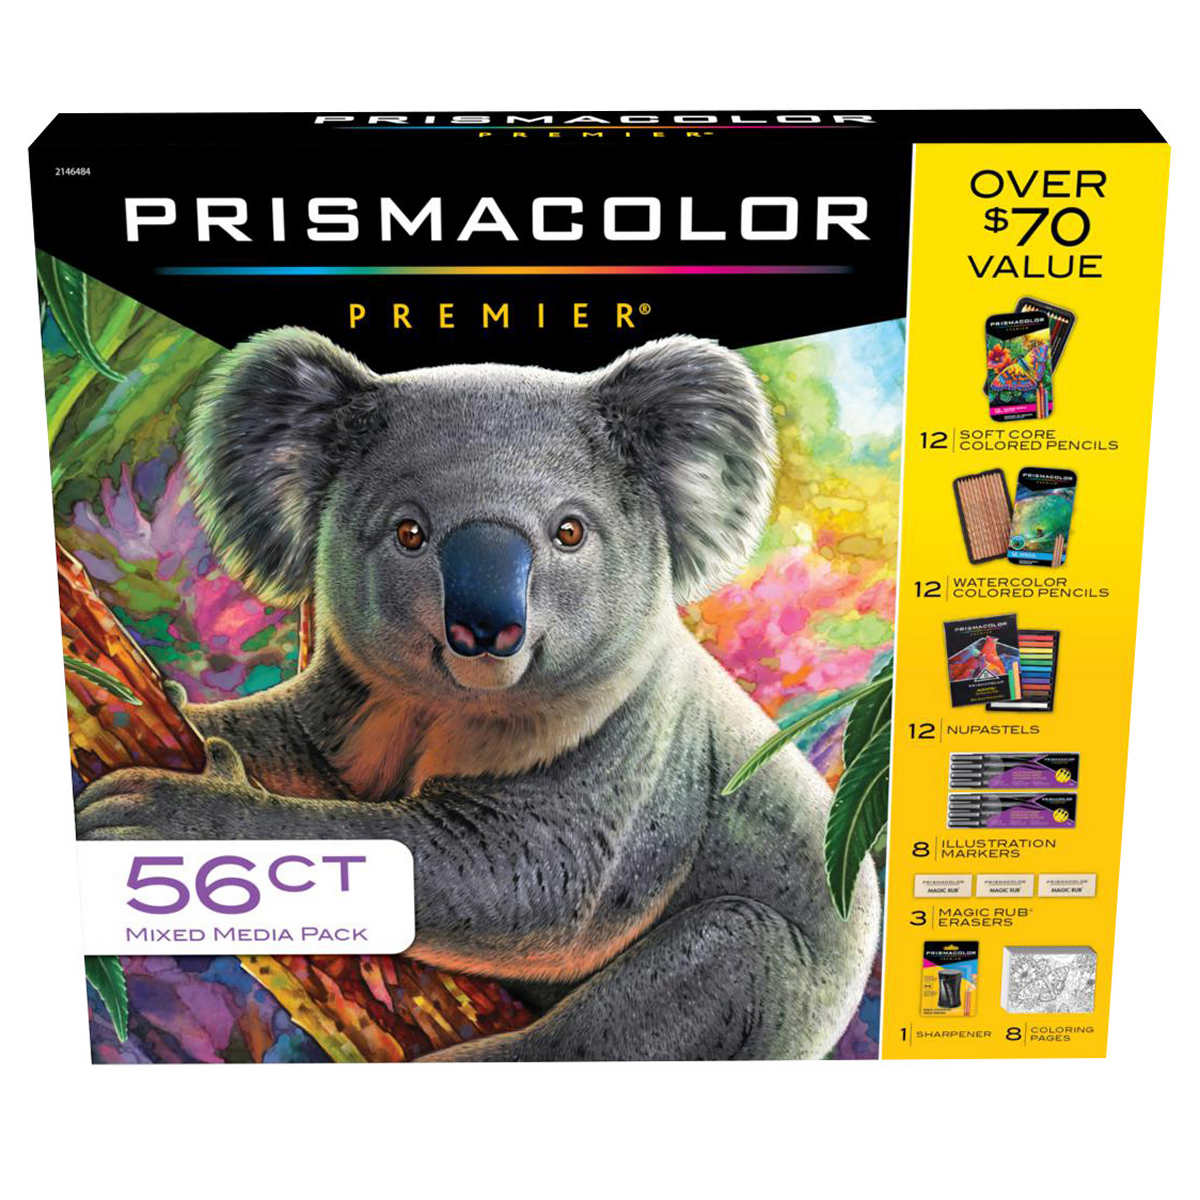 Prismacolor Technique Animal Drawing Set - Level 2, Color and Style